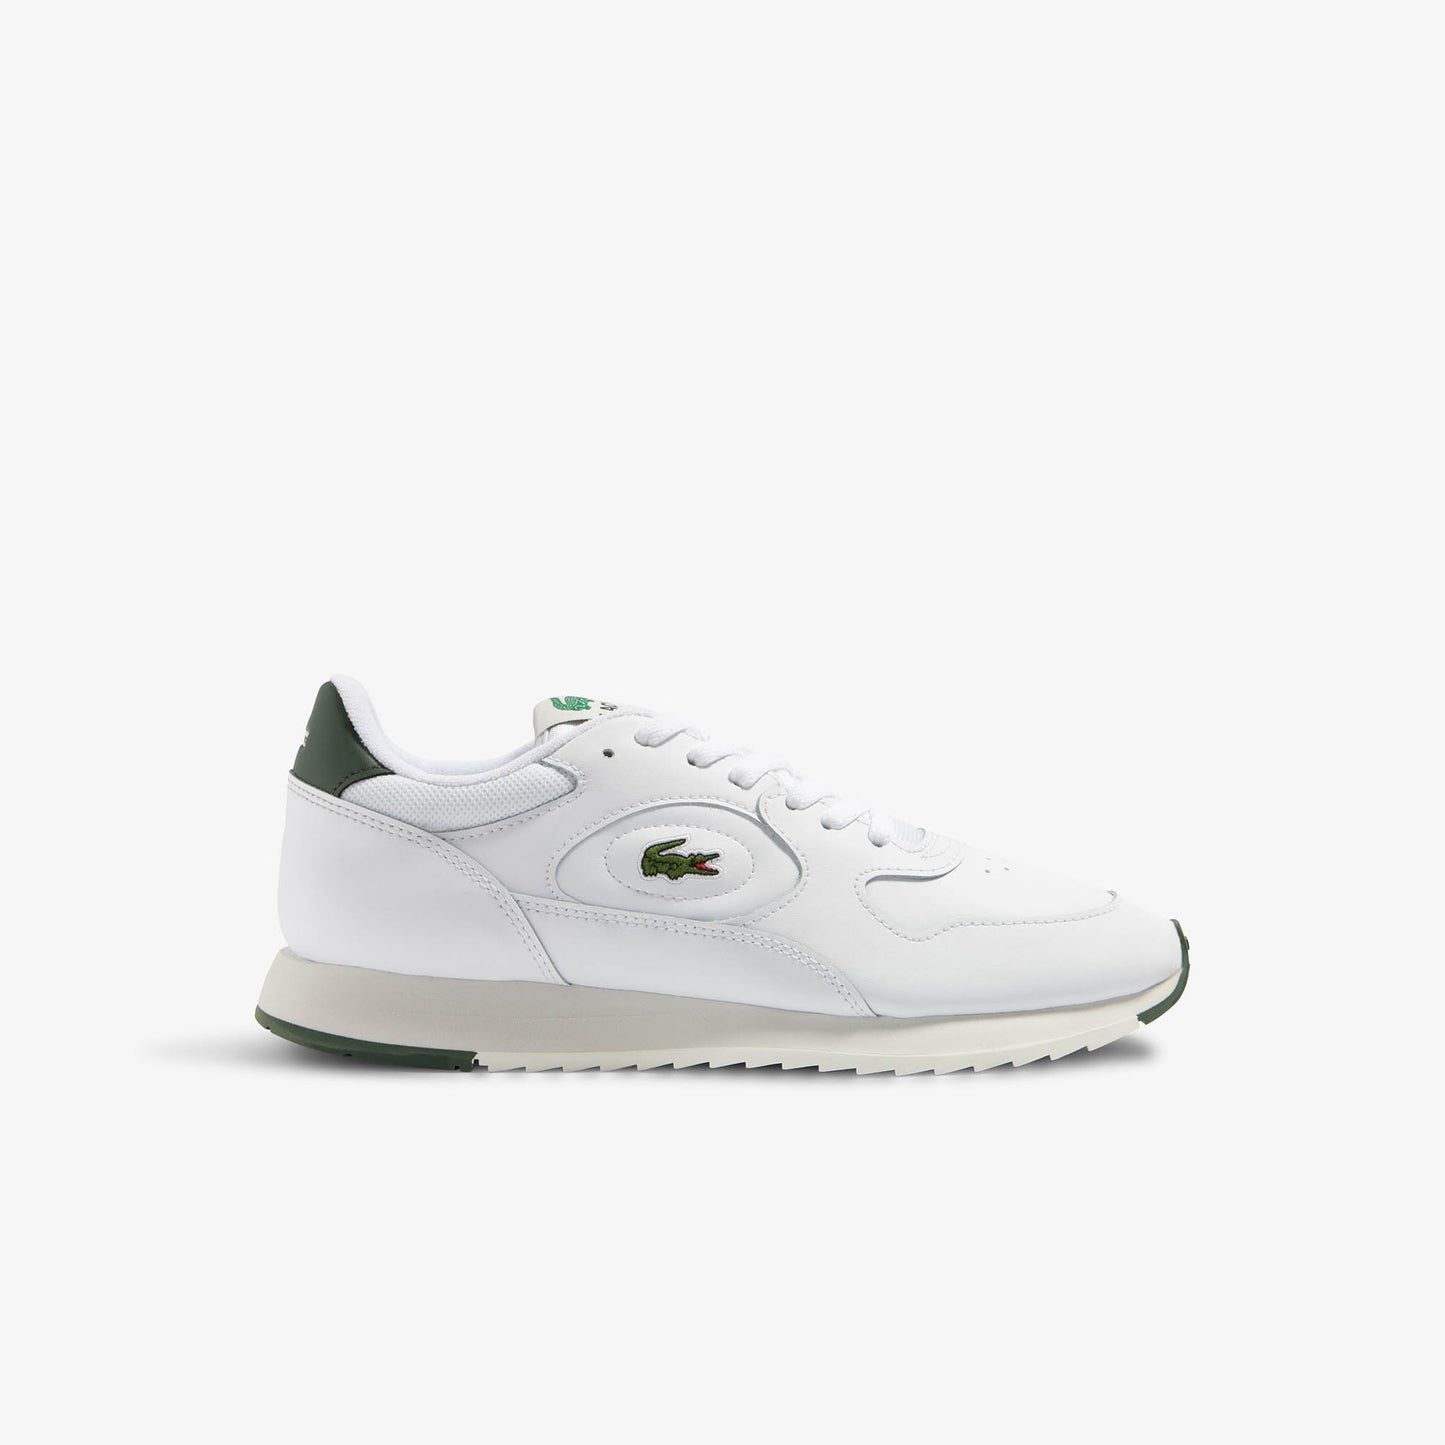 Men's Linetrack Leather Trainers